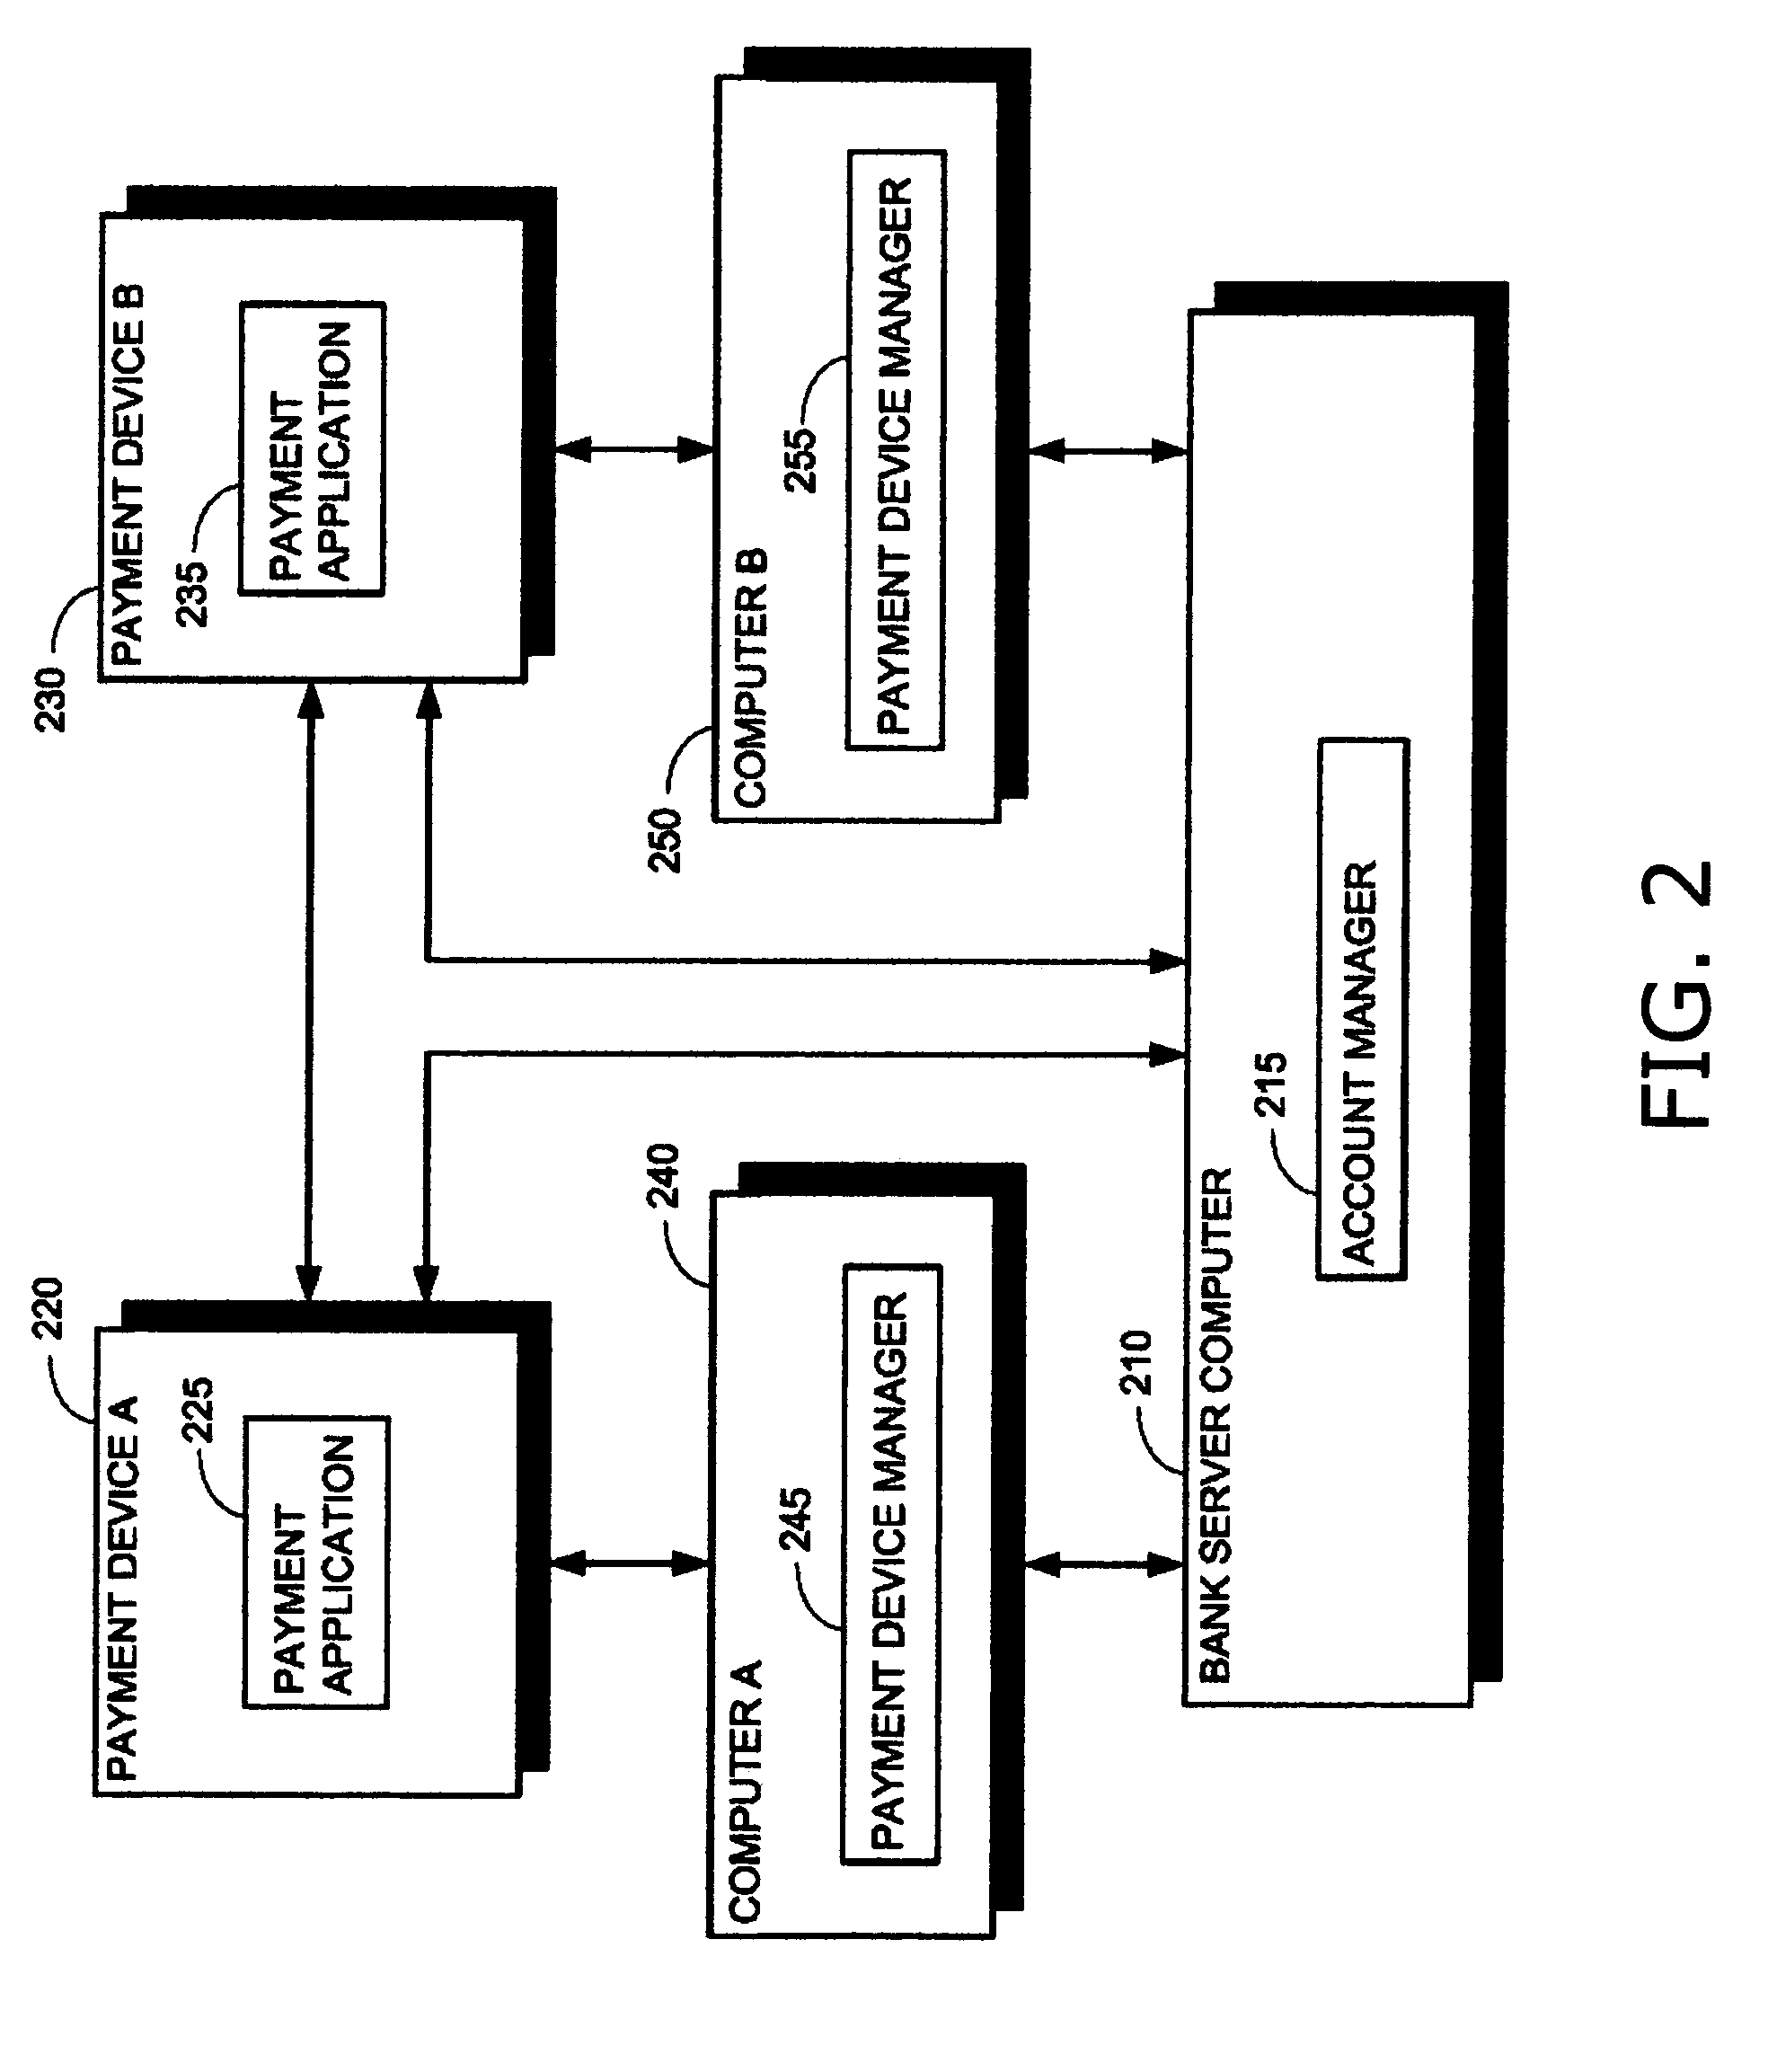 Computerized person-to-person payment system and method without use of currency